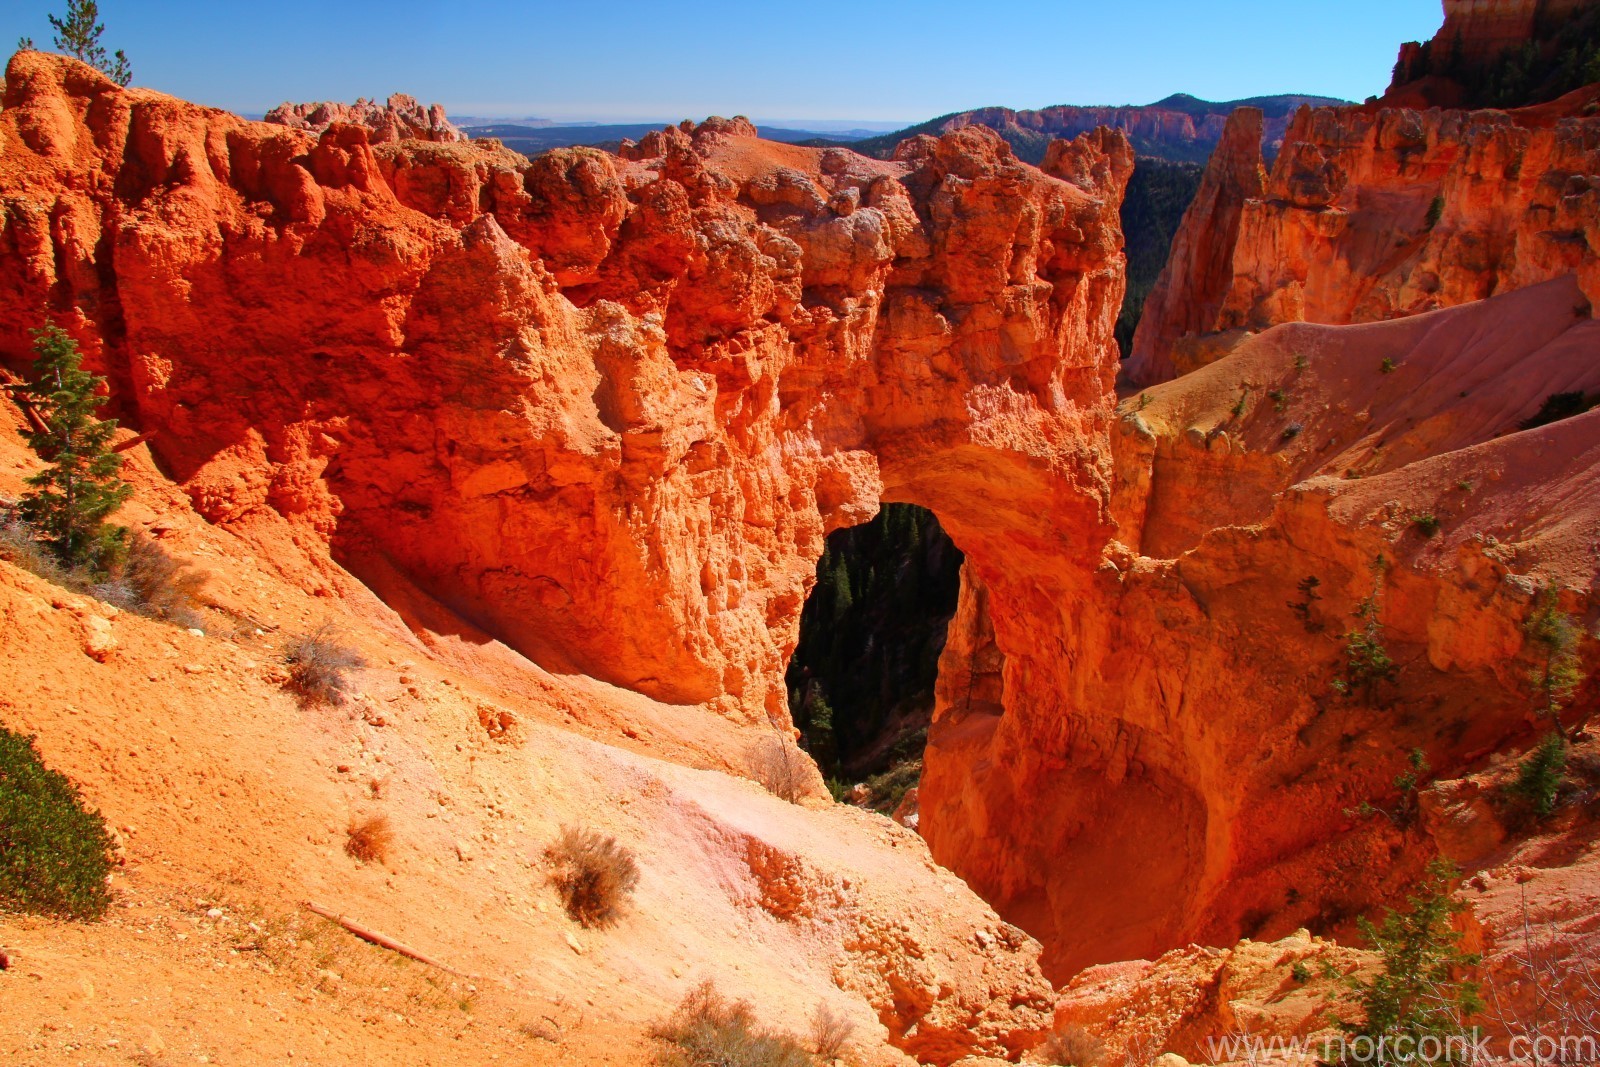 Bryce Canyon arch